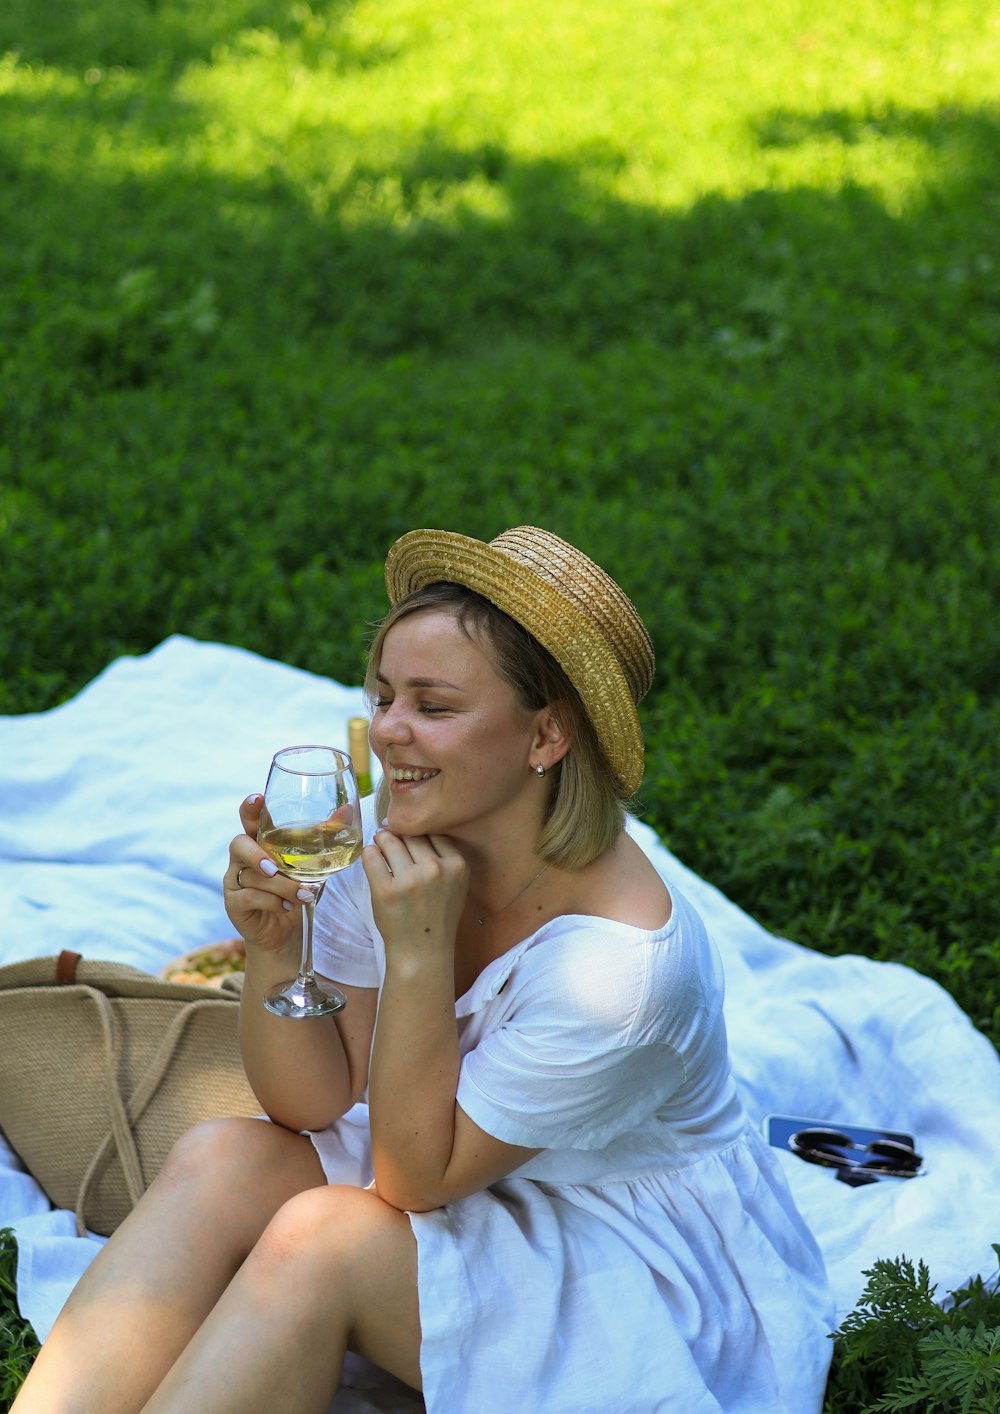 a woman sitting on a blanket holding a glass of wine